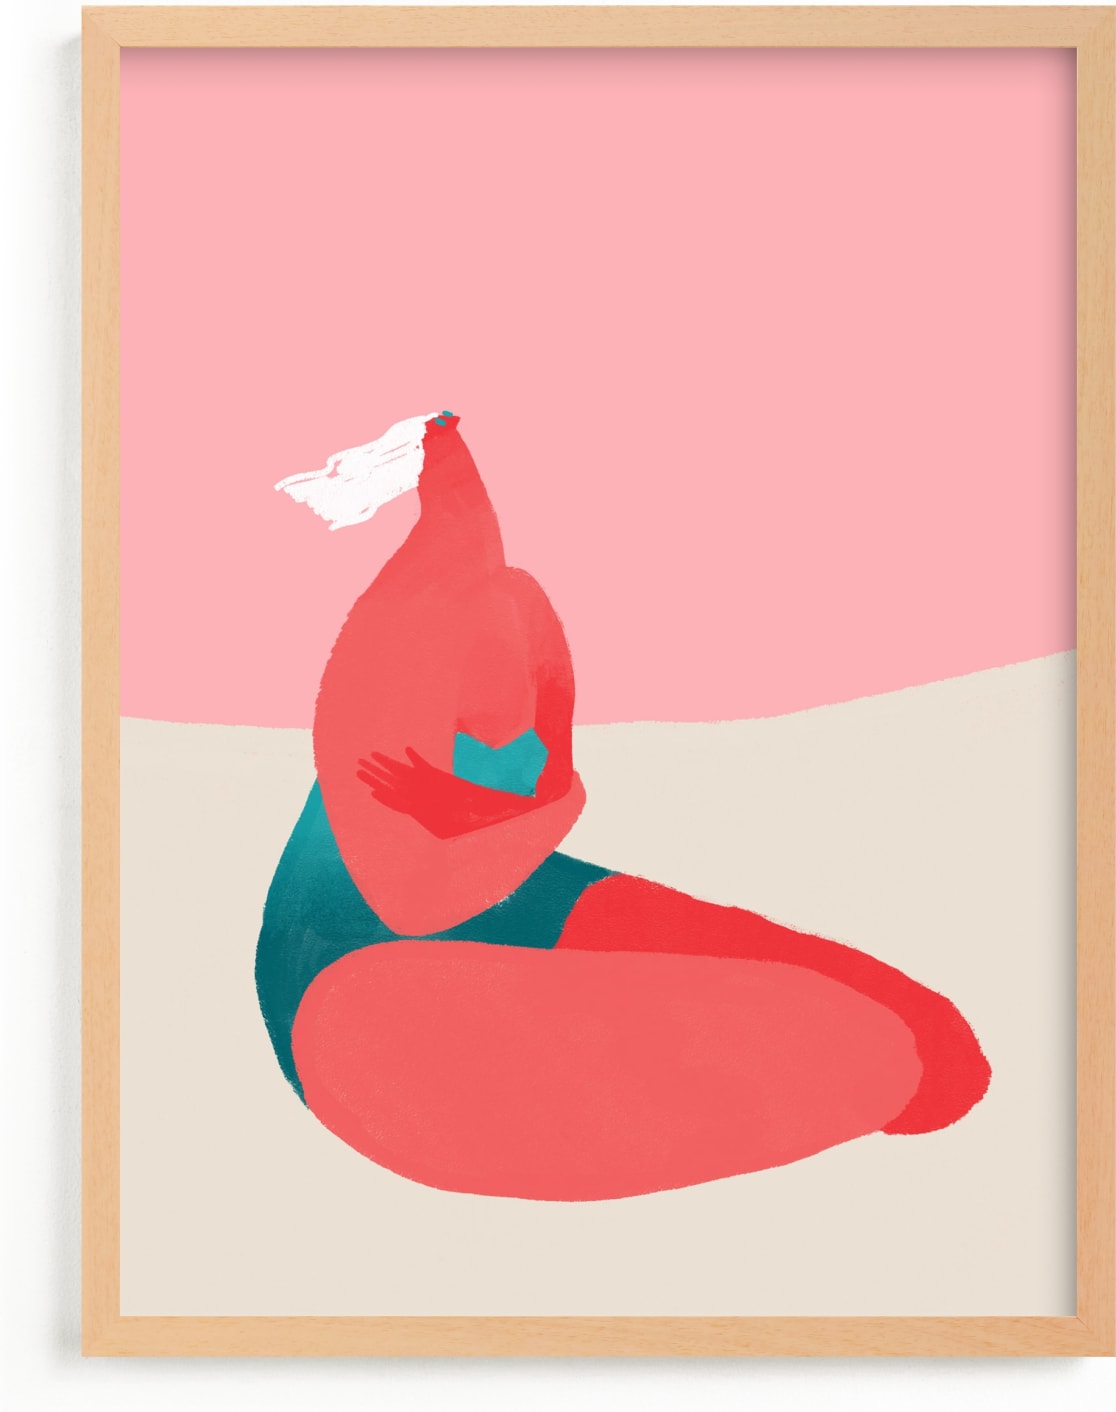 This is a pink, orange, rosegold art by Katie Spak called Breeze.